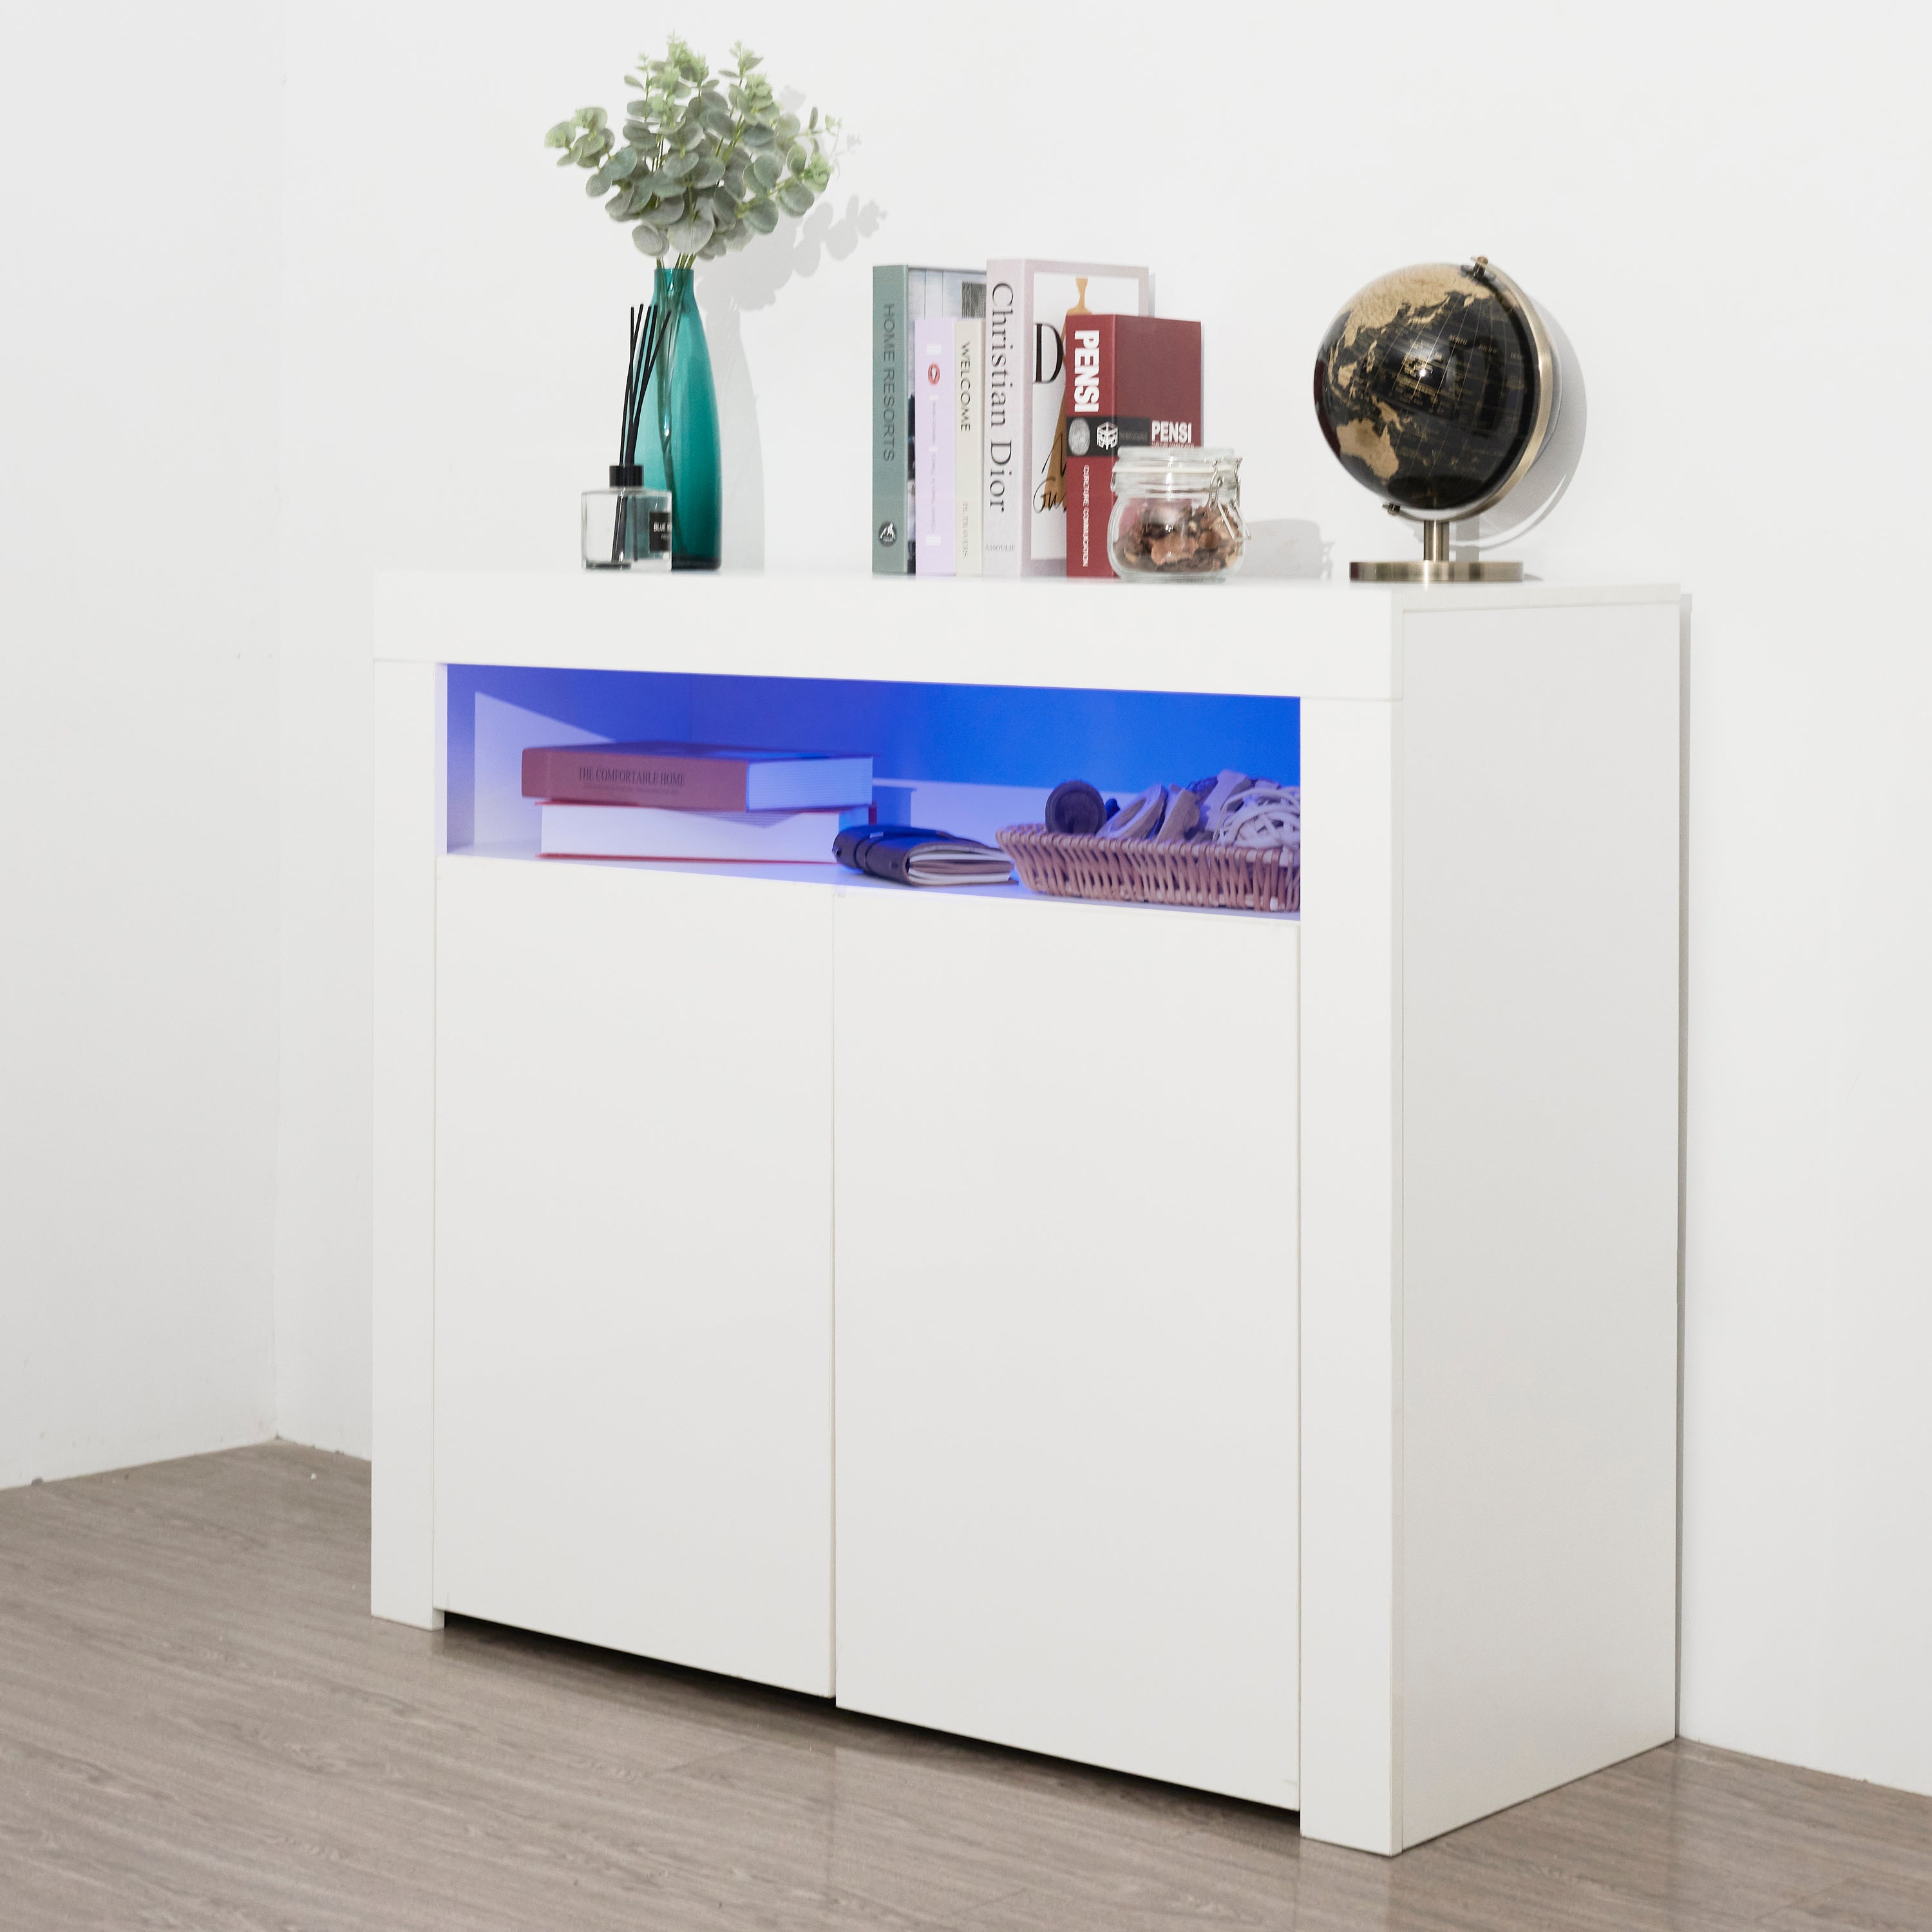 Living Room Sideboard Storage Cabinet White High Gloss with LED Light, Modern Kitchen Unit Cupboard Buffet Wooden Storage Display Cabinet TV Stand with 2 Doors for Hallway Dining Room